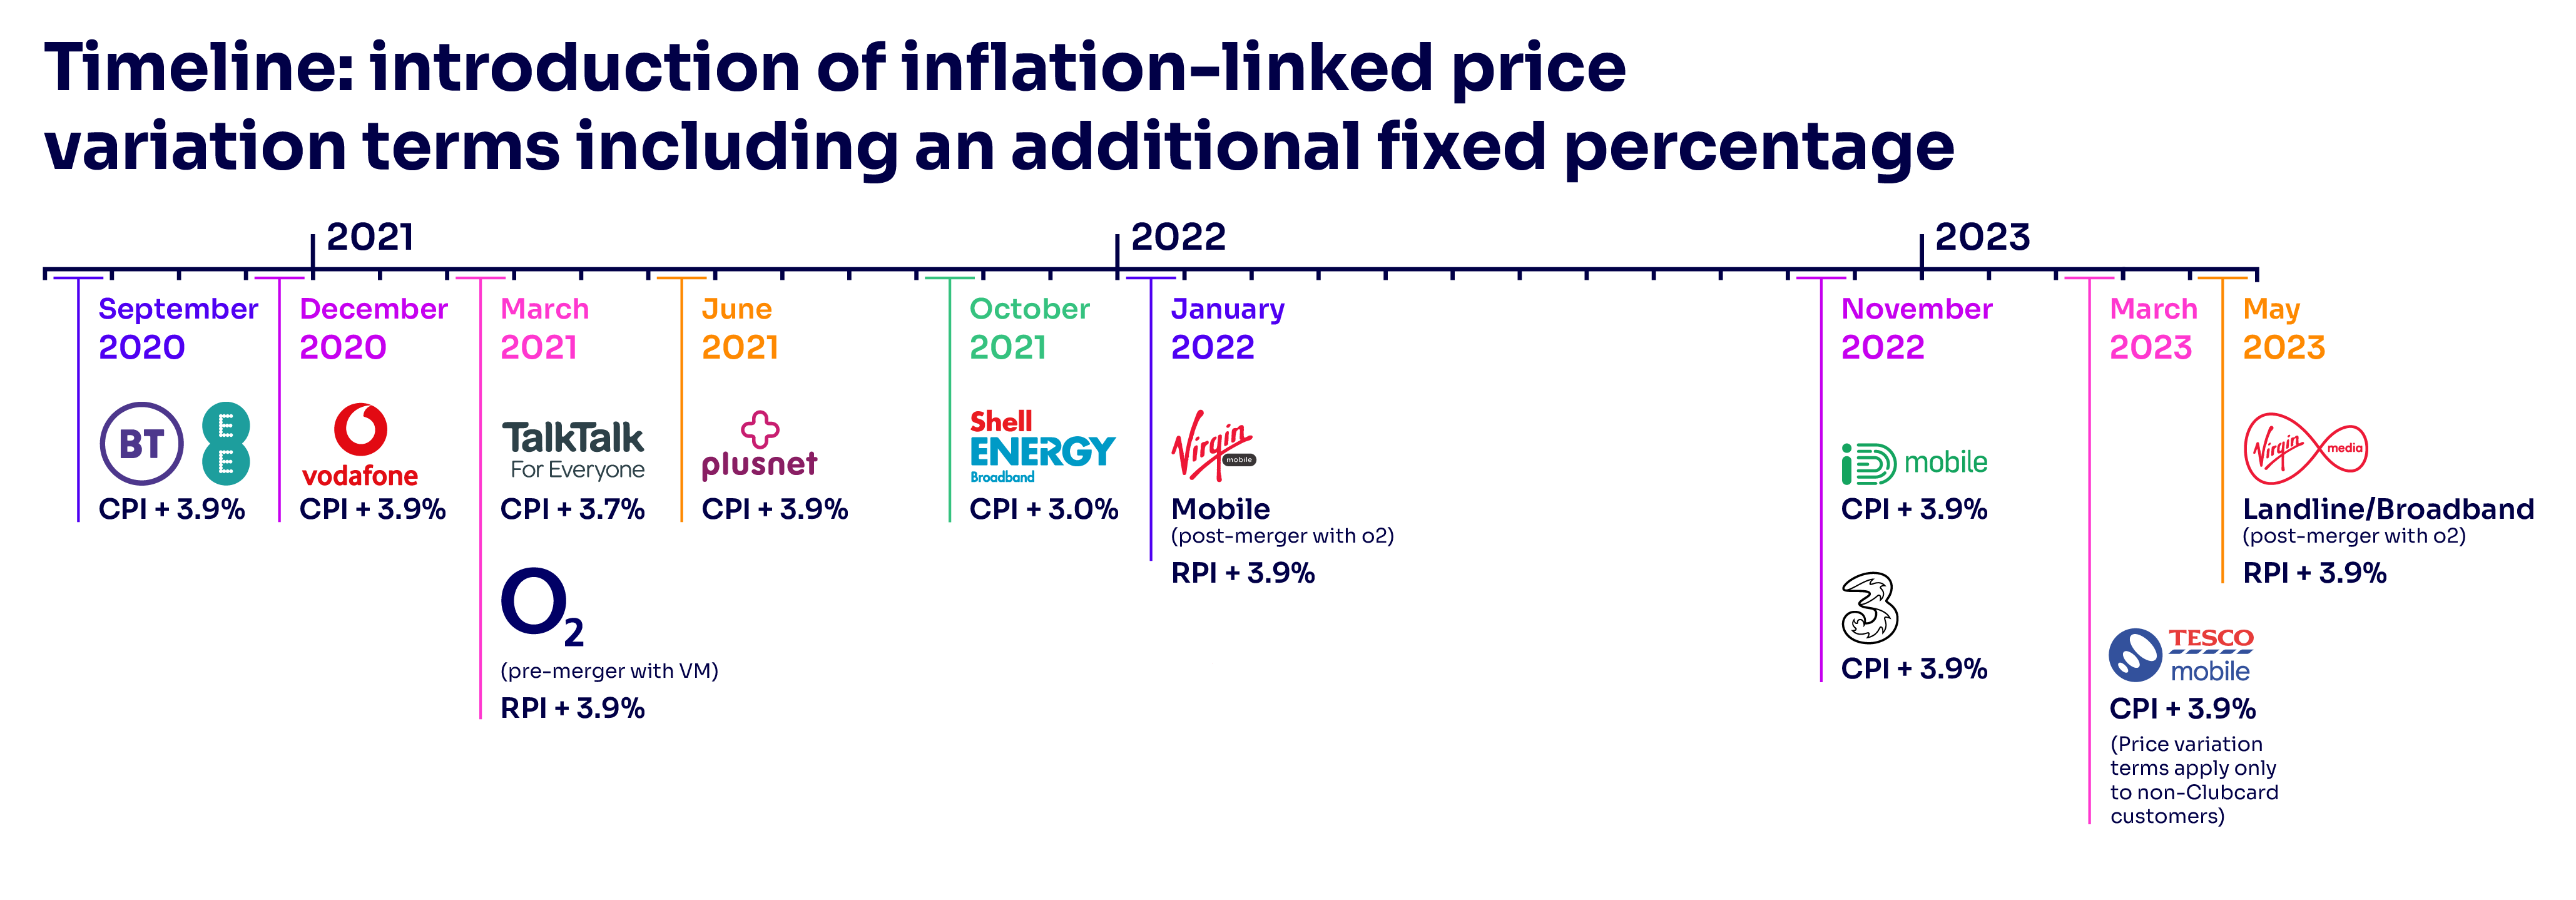 Timeline: Introduction of inflation-linked price variation terms including an additonal fixed percentage